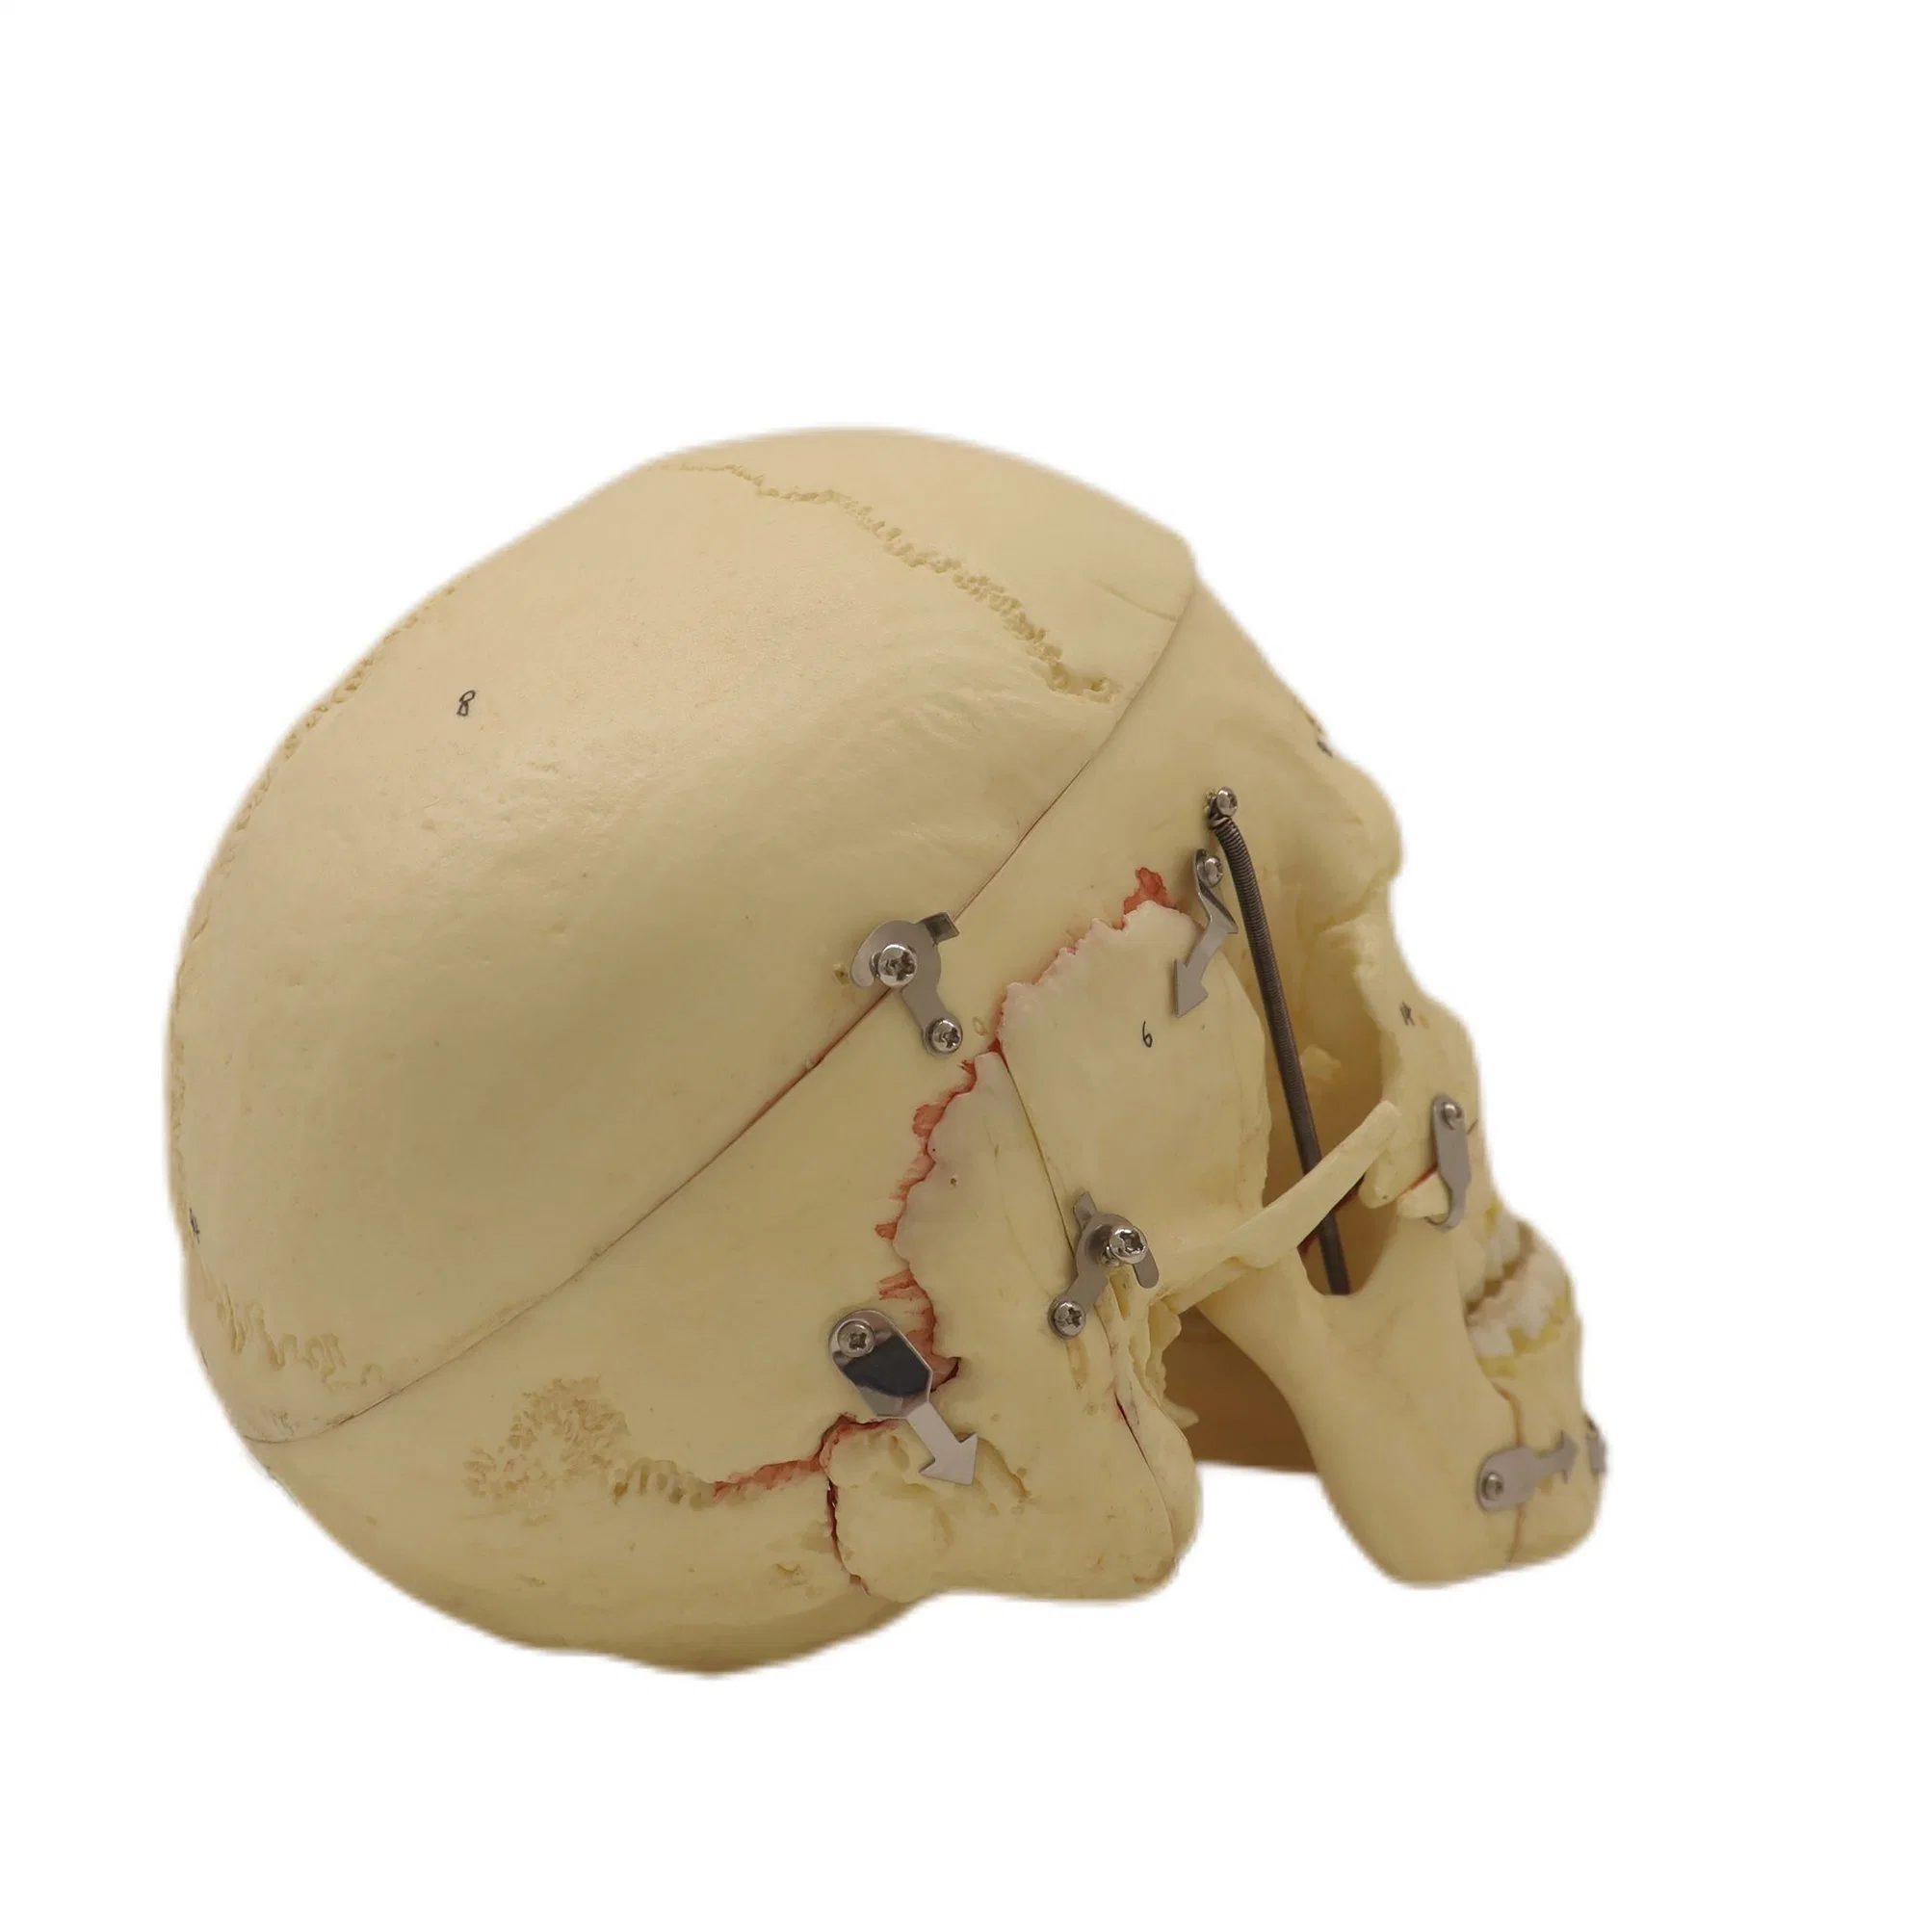 Good Quality of Medical Teaching Anatomical Model of Adult Skull with Blood Vessels and Nerves